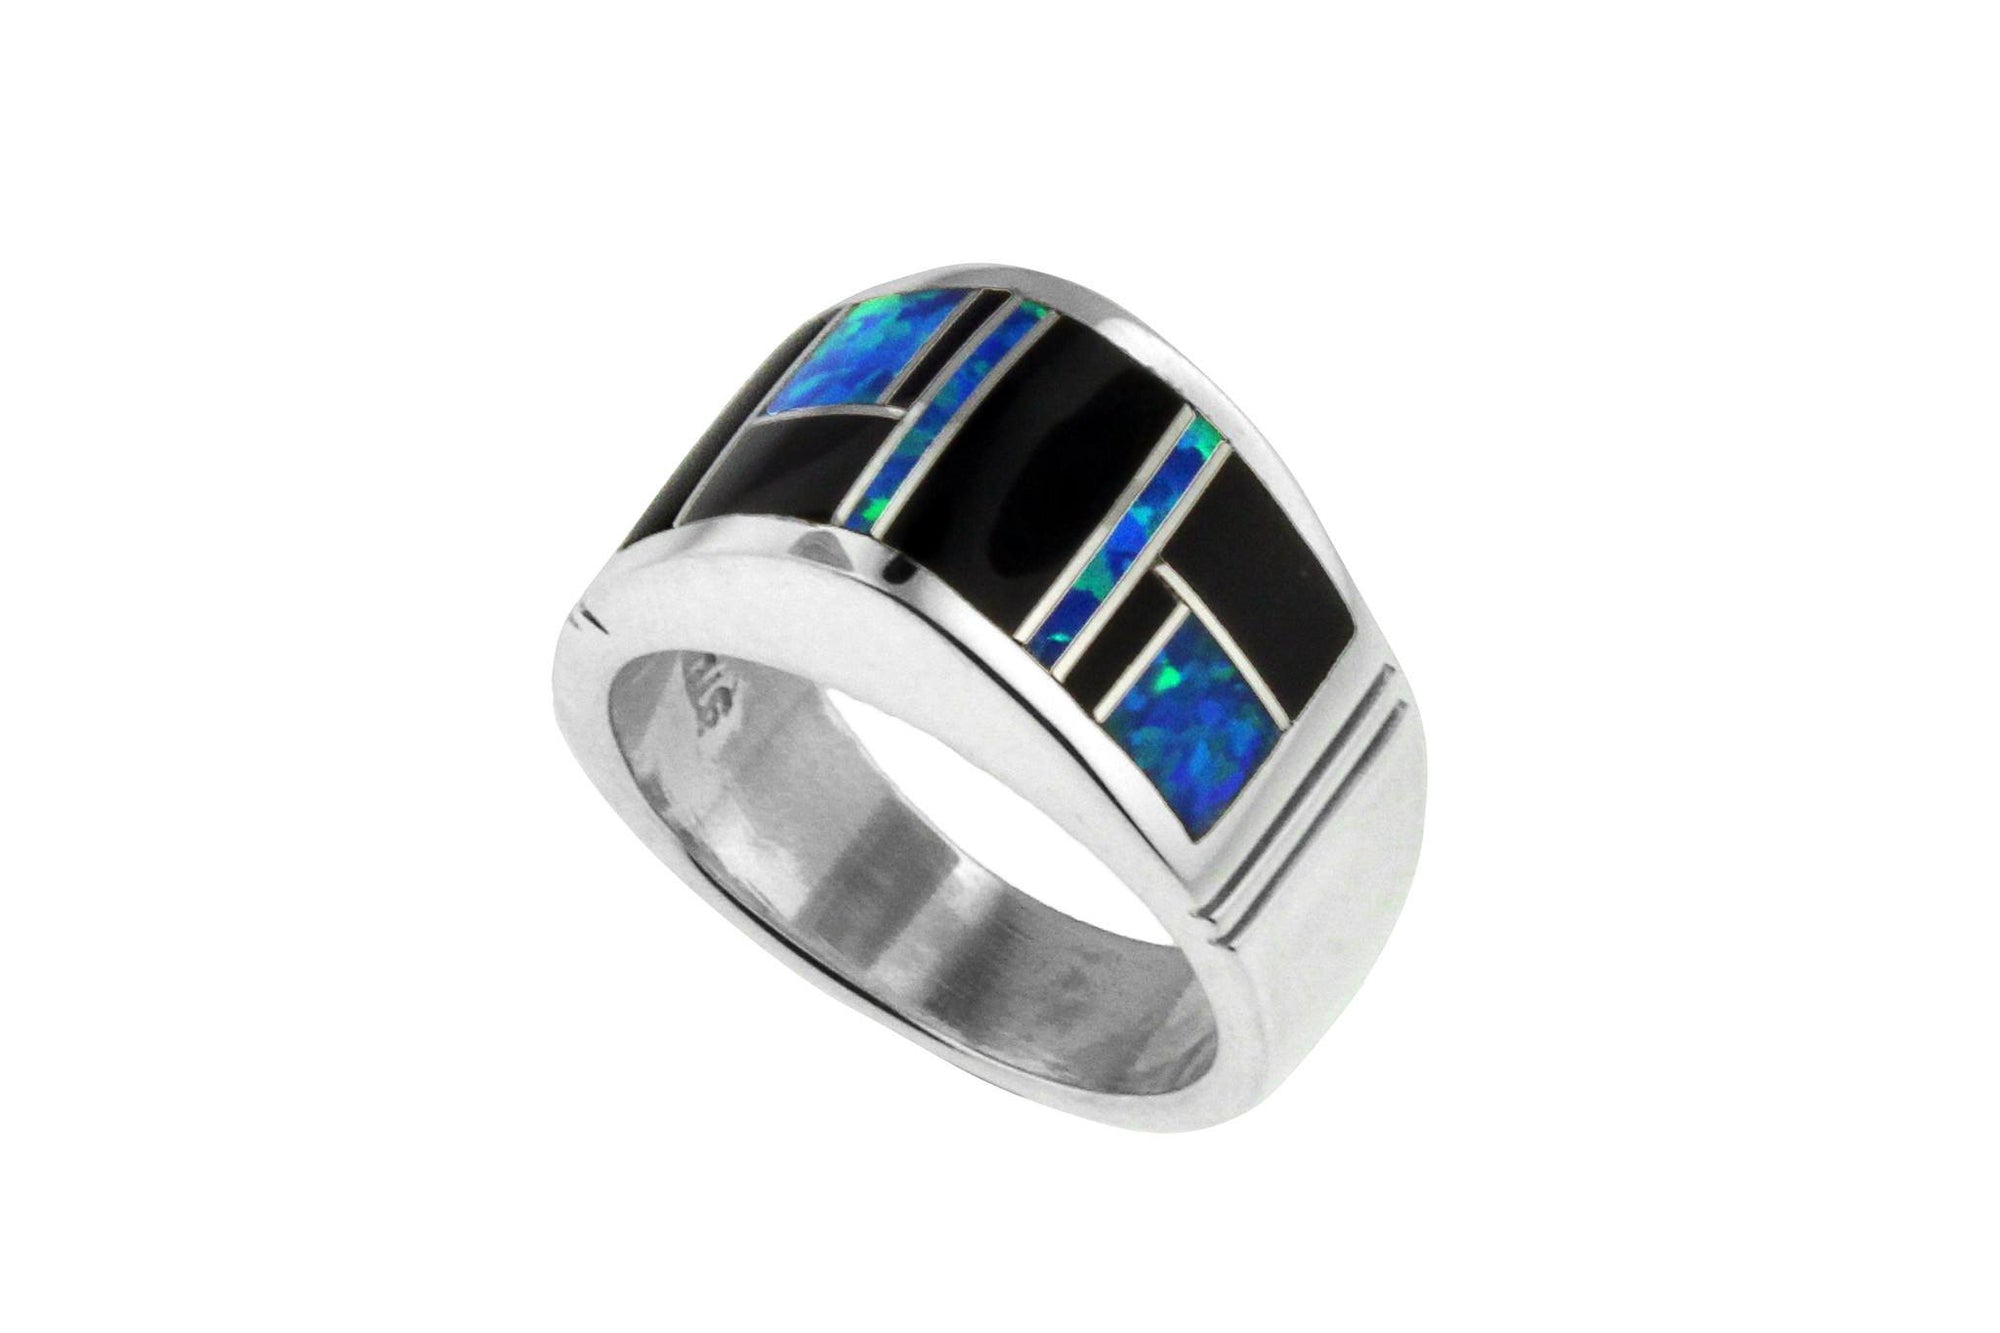 Native American Jewelry - David Rosales Domed Black Beauty Ring